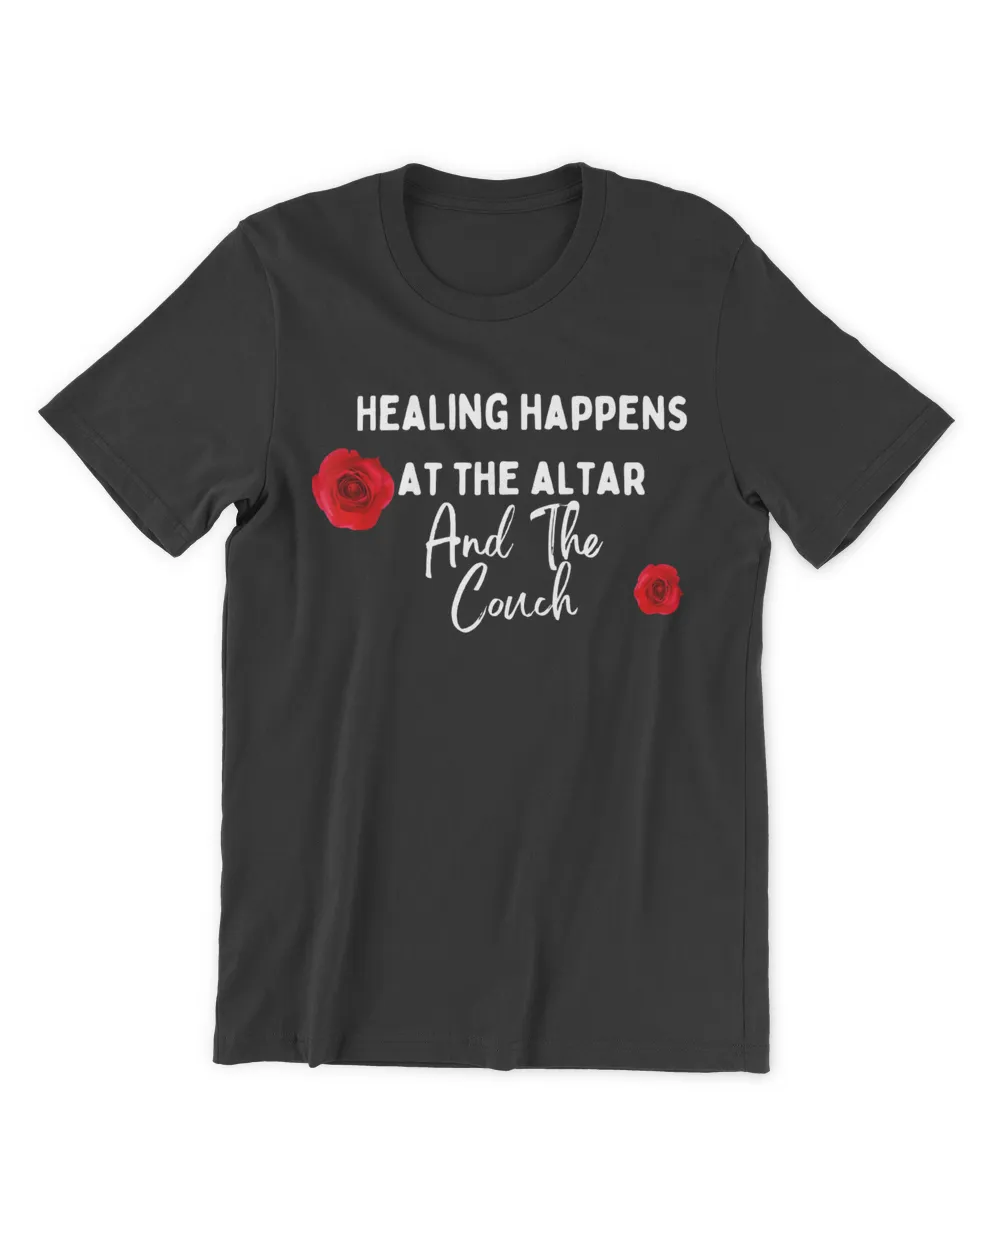 Healing Happens At The Altar And The Couch Shirt